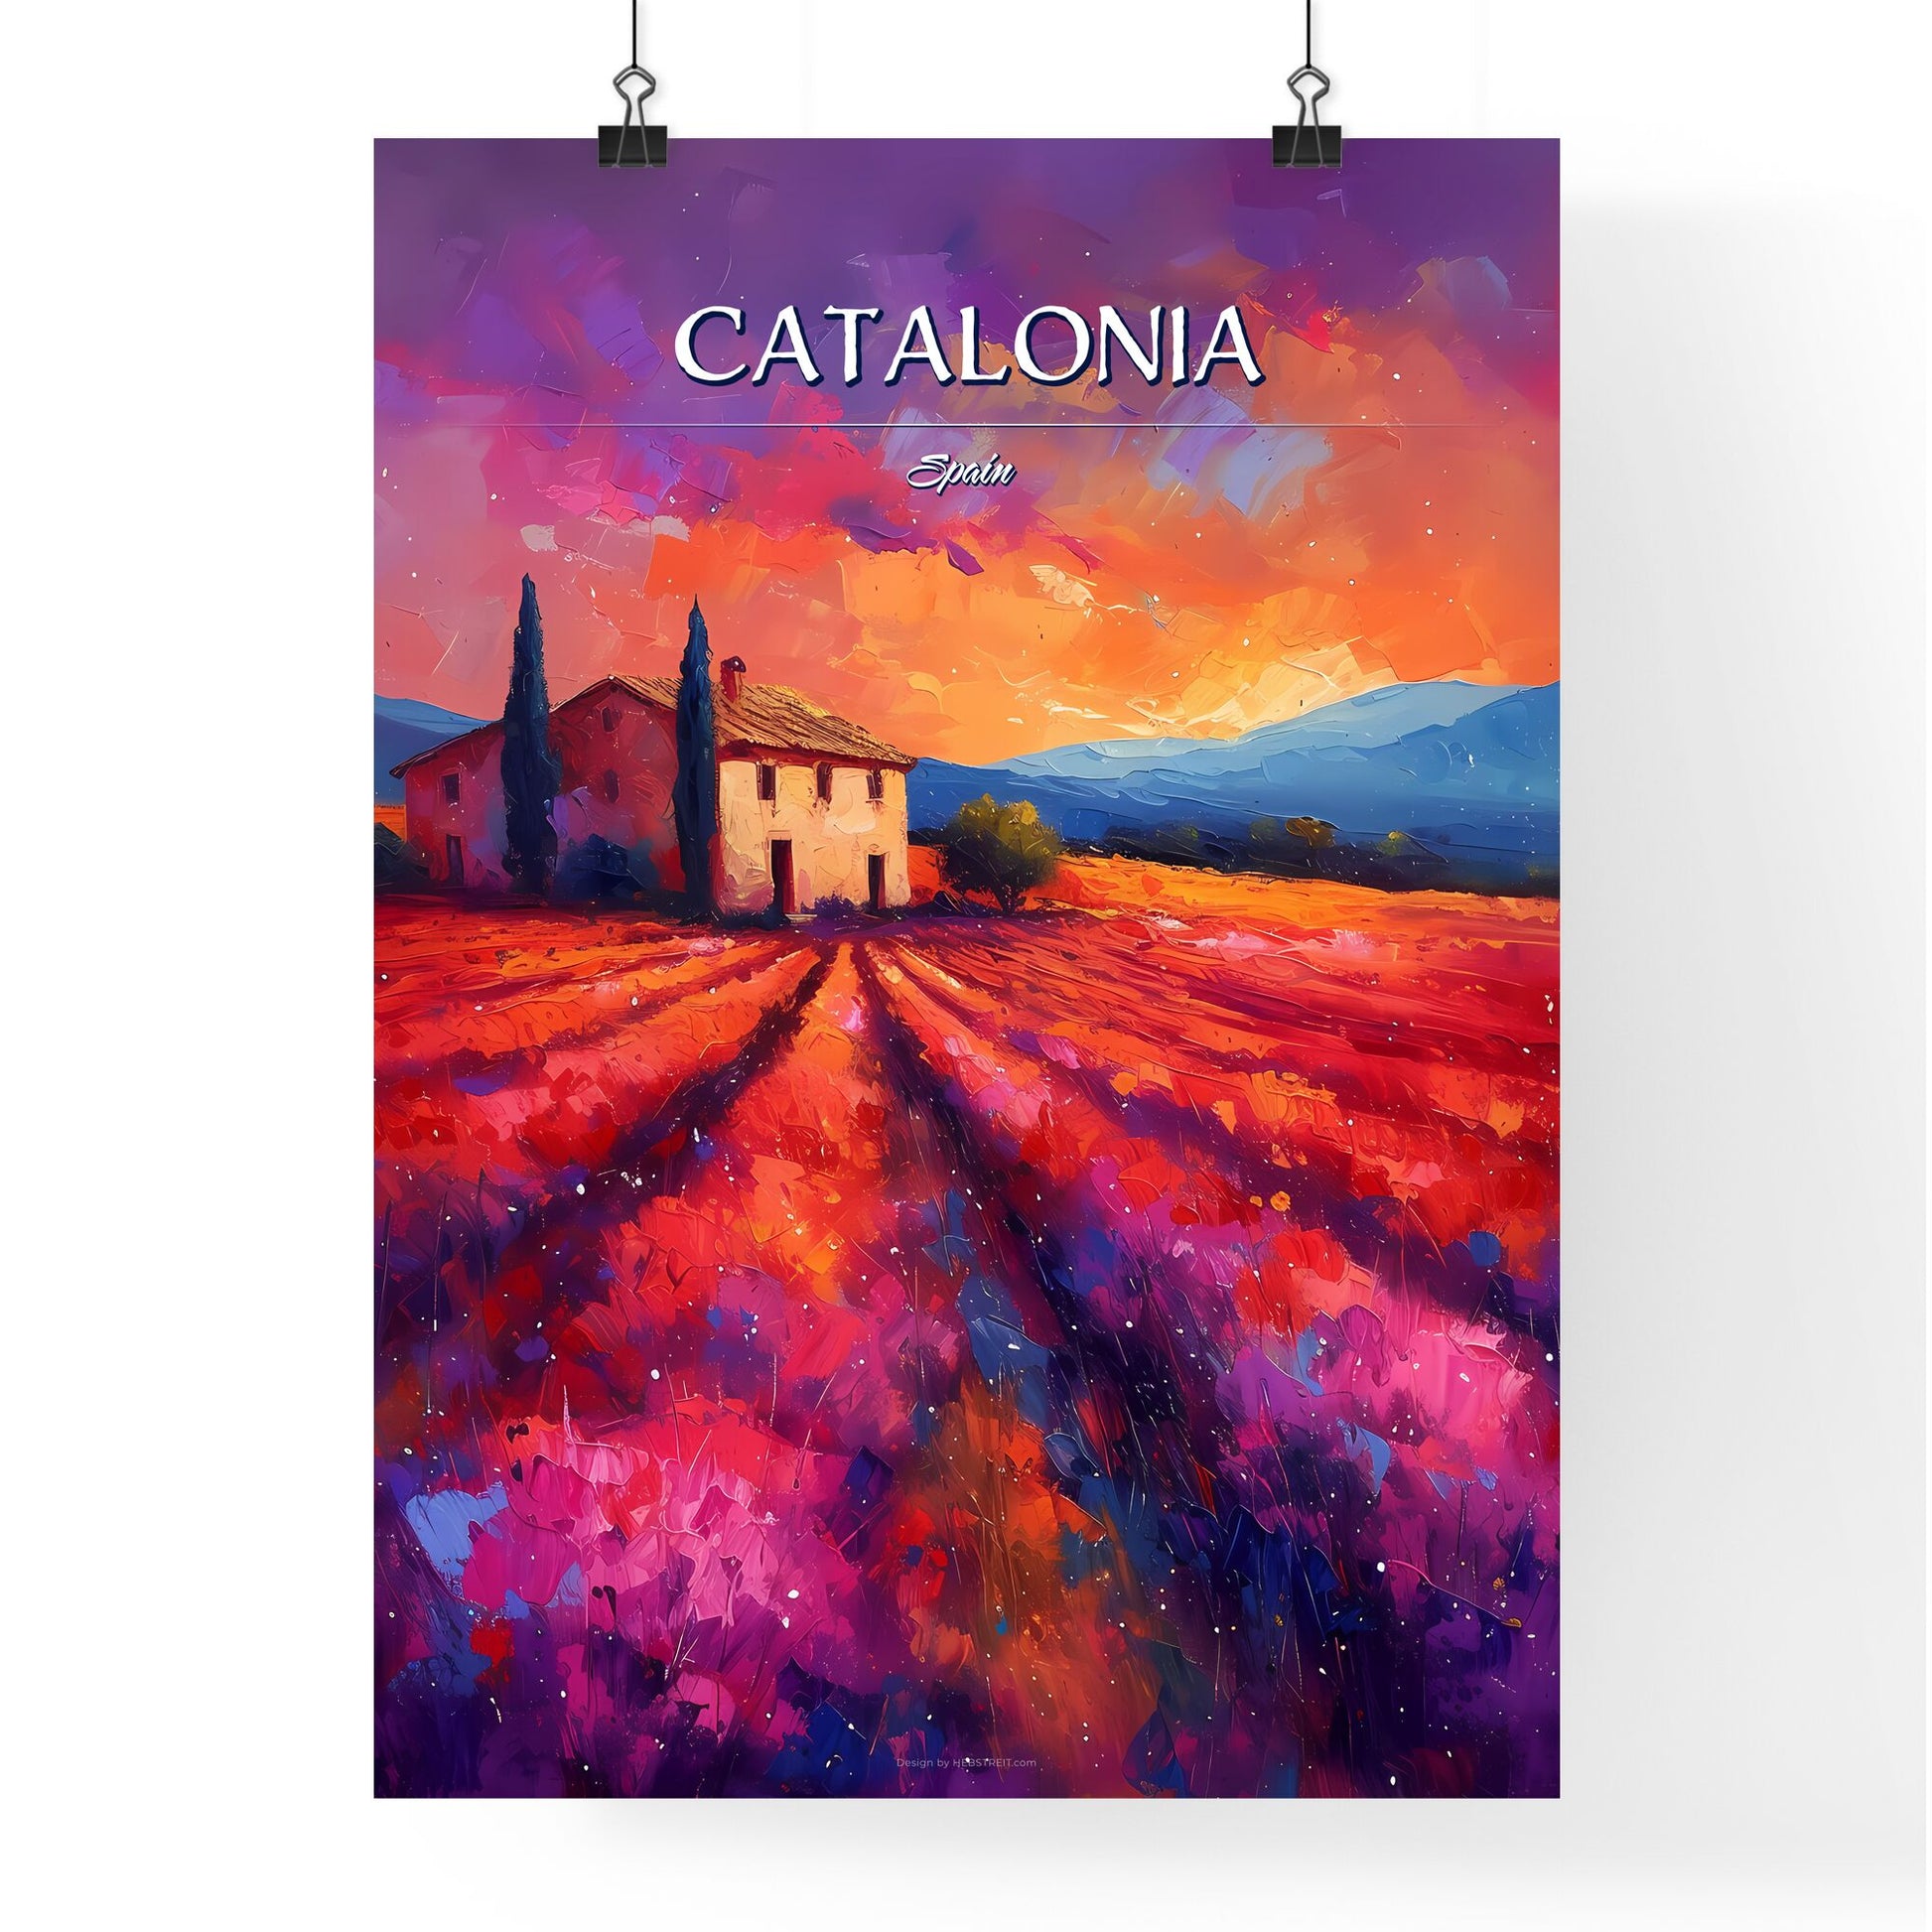 Catalonia, Spain - Art print of a painting of a house in a field of flowers Default Title